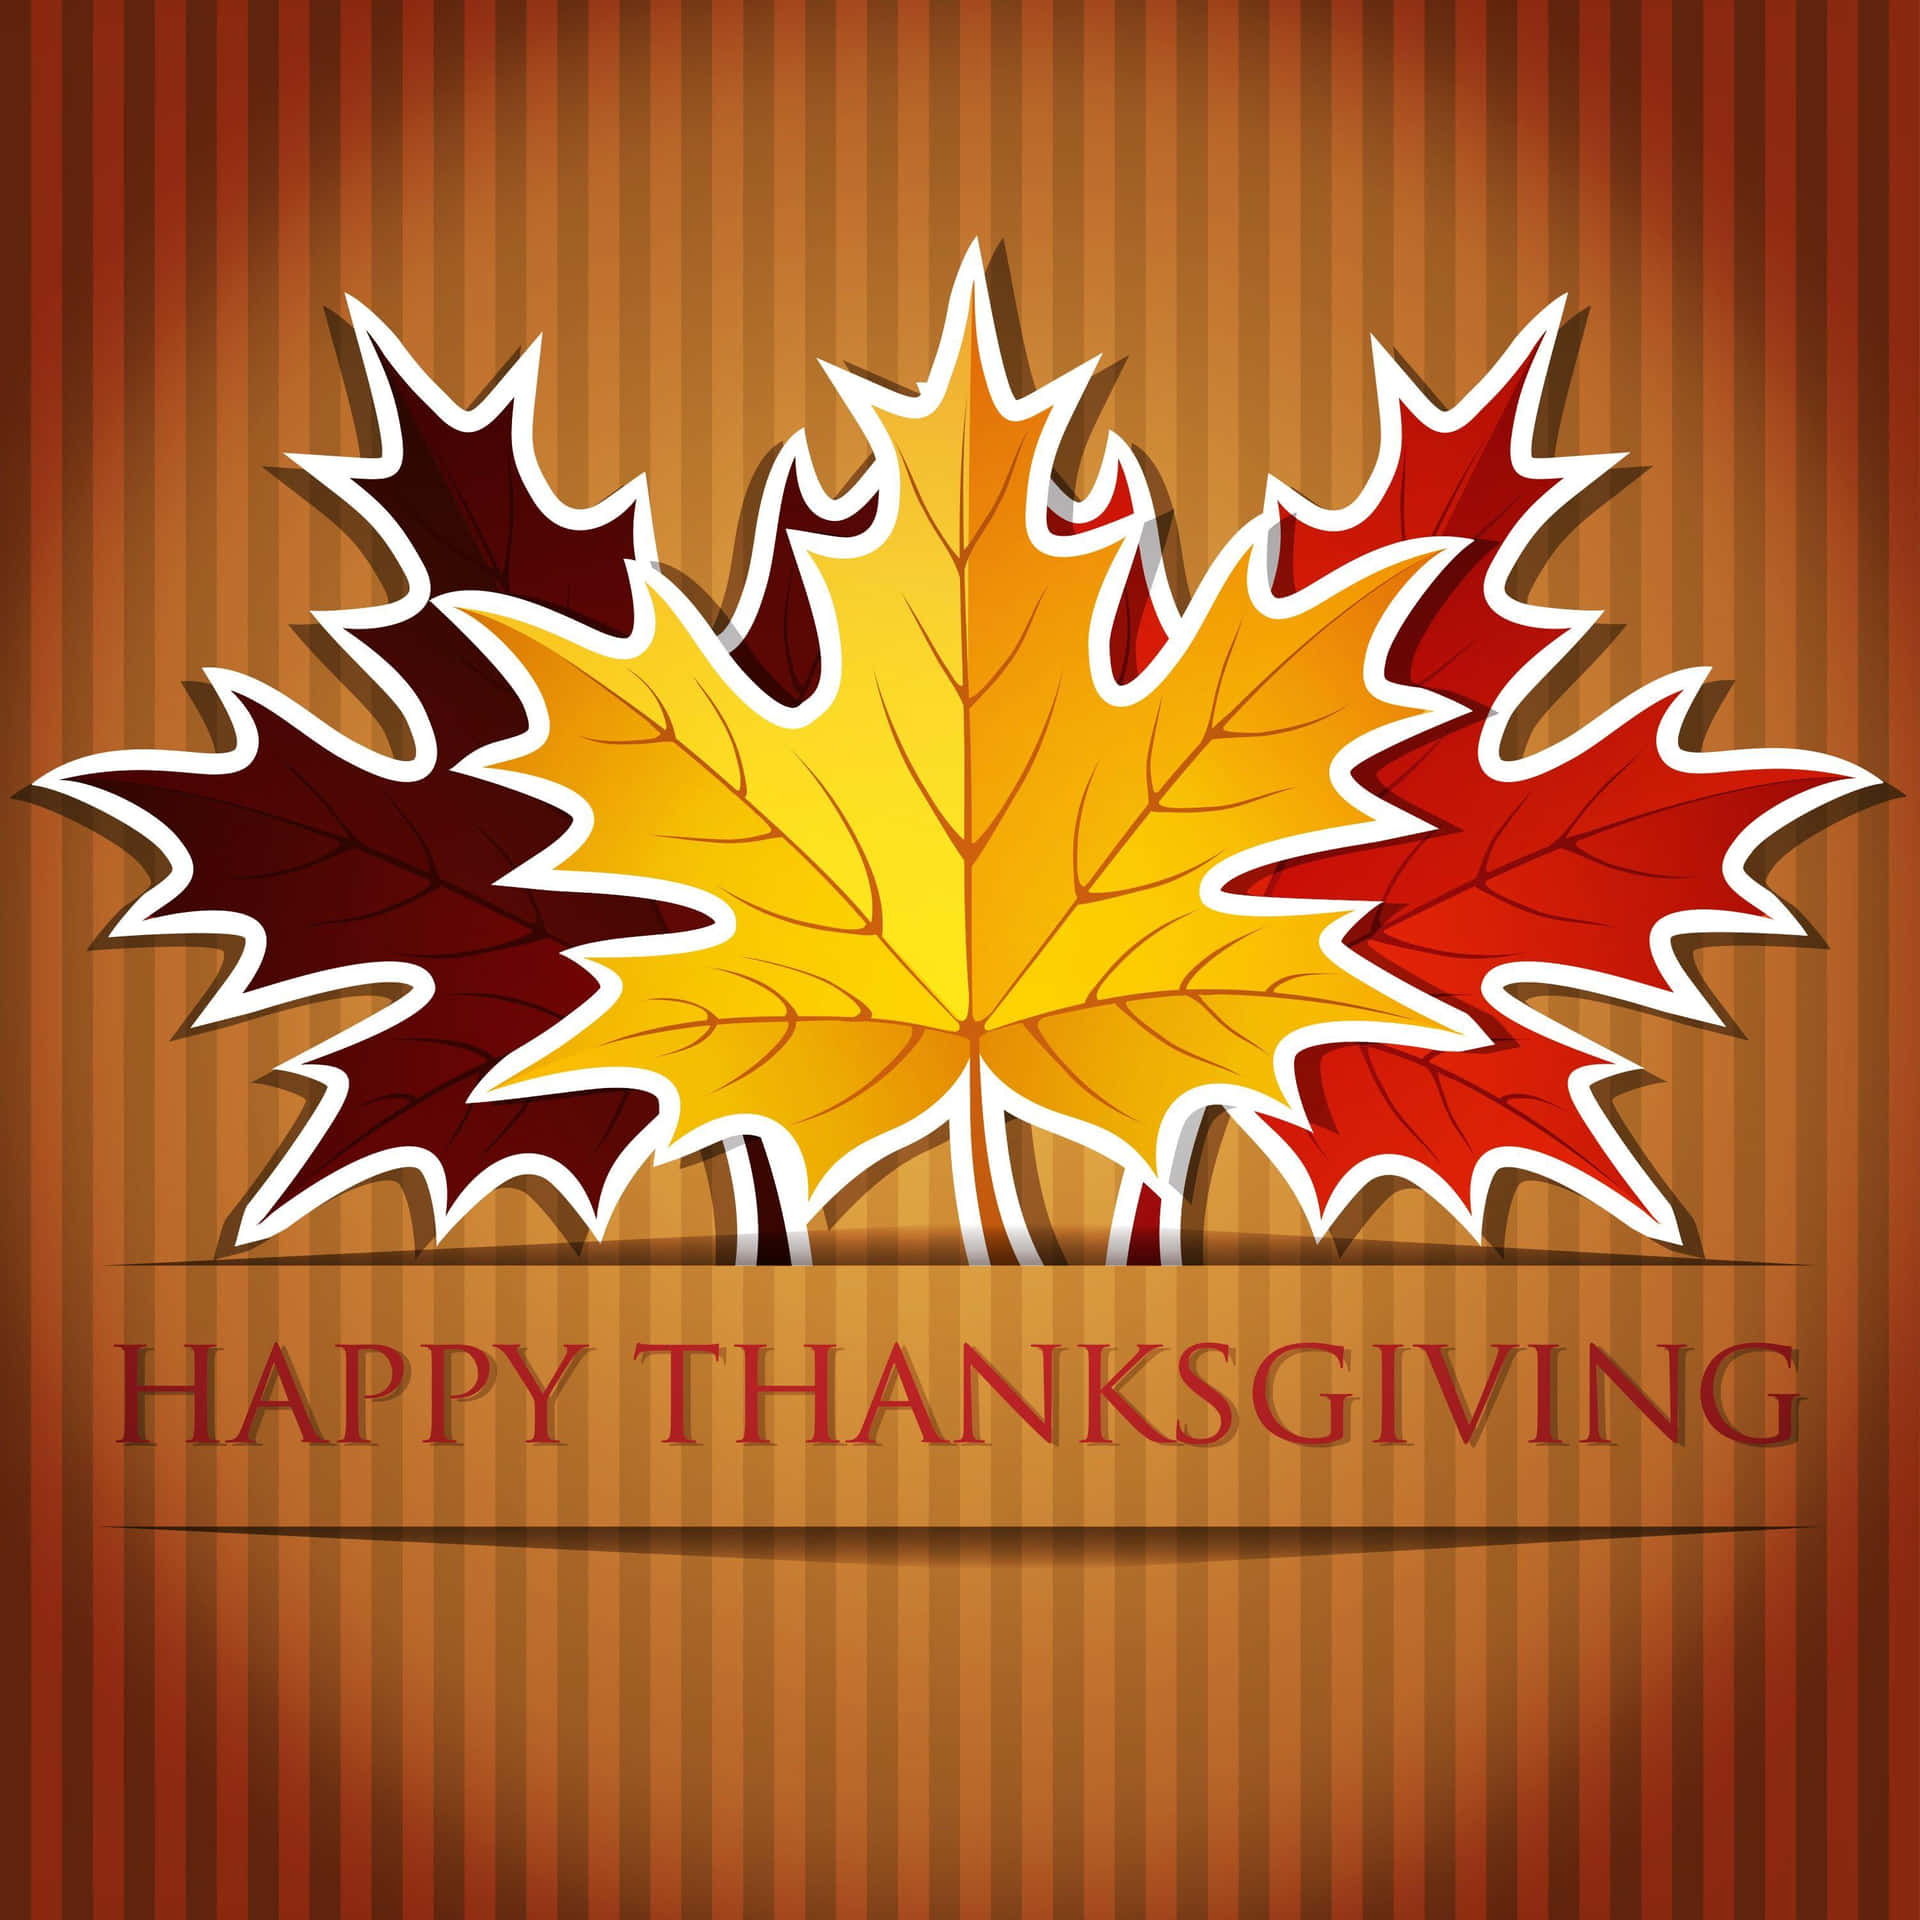 Wishing You and Your Loved Ones a Happy Thanksgiving